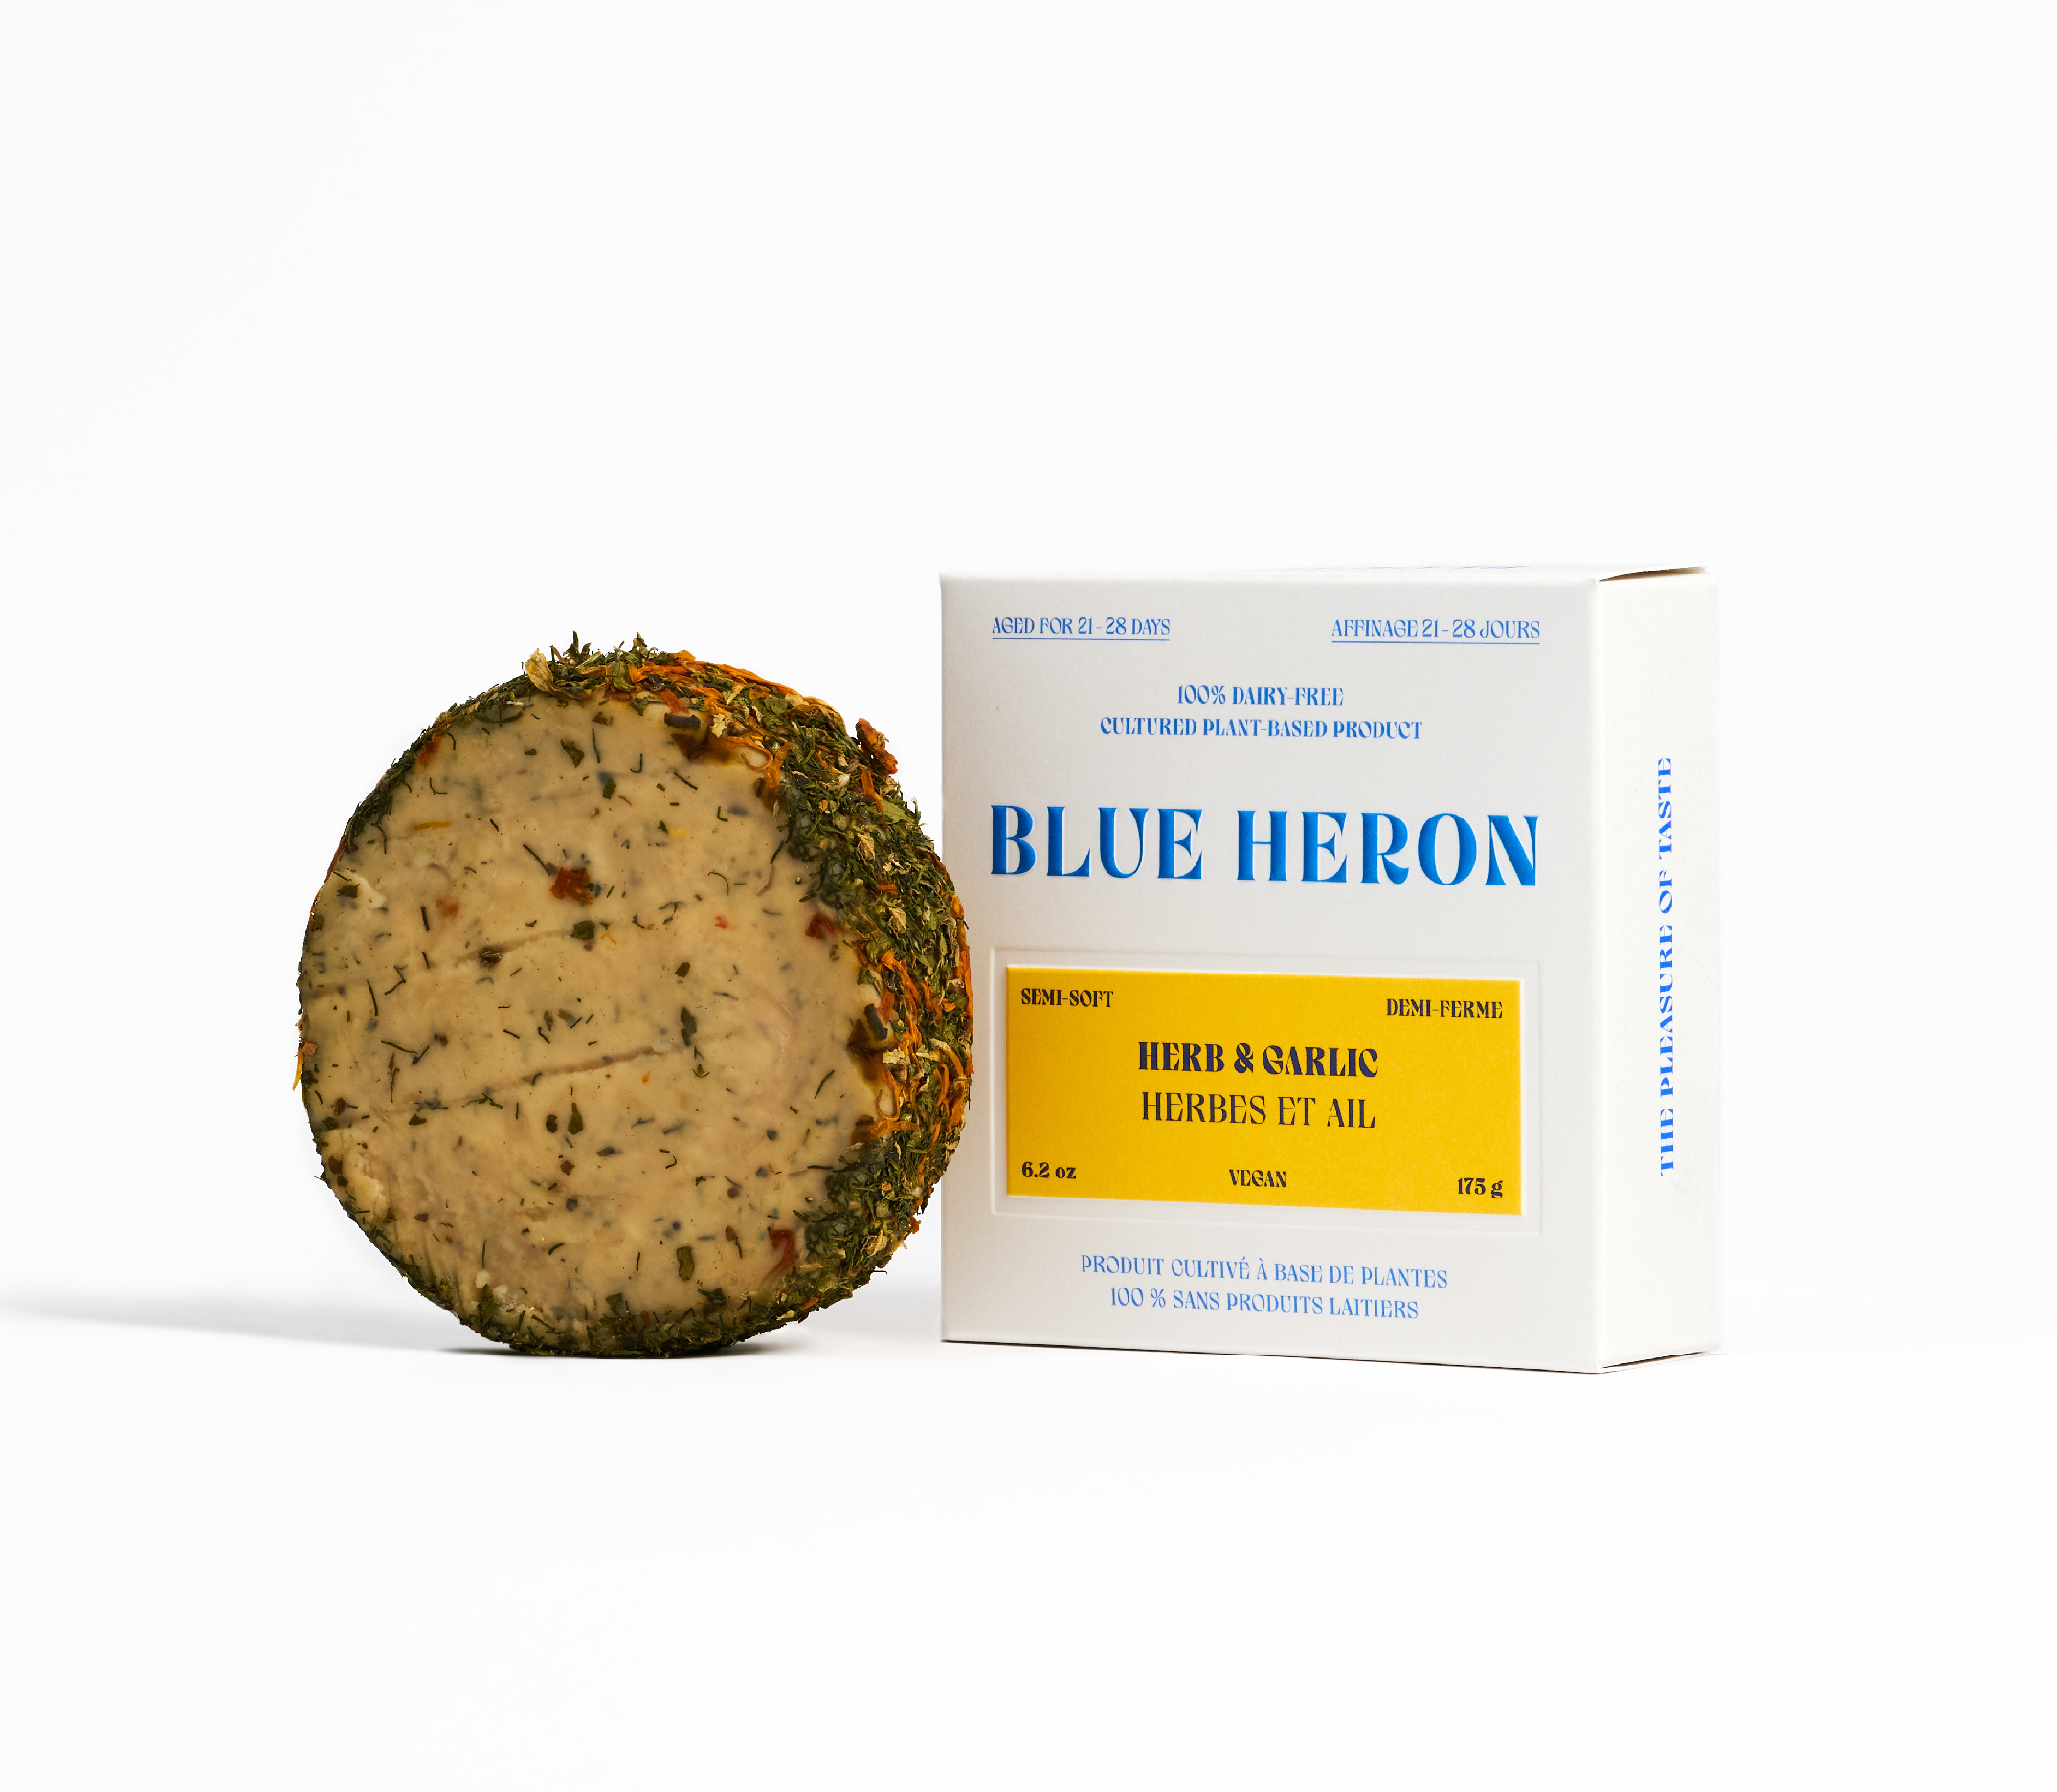 Packaging design for Blue Heron, plant based cheese, Herb & Garlic.